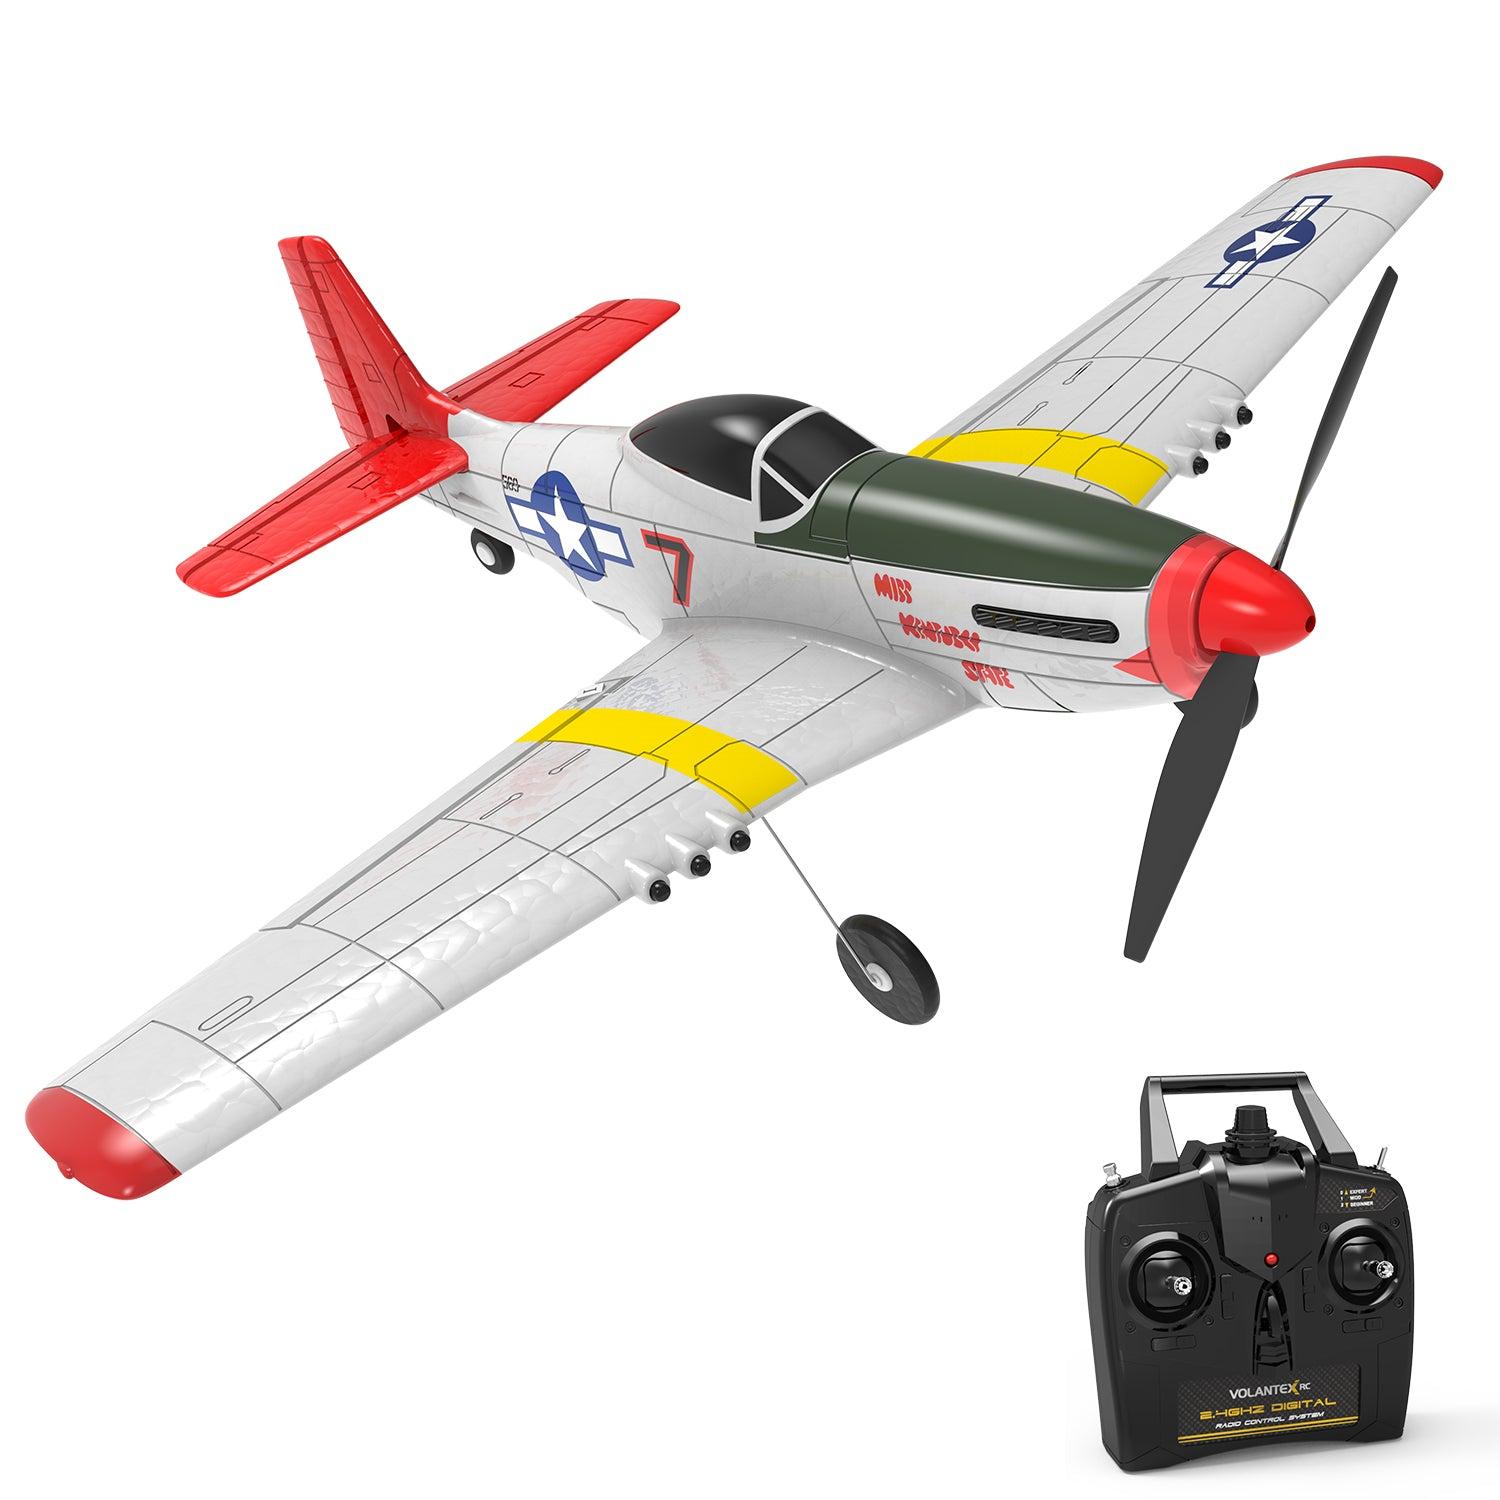 Radio Controlled Planes For Sale: Choosing the Right Radio-Controlled Plane For Your Skill Level